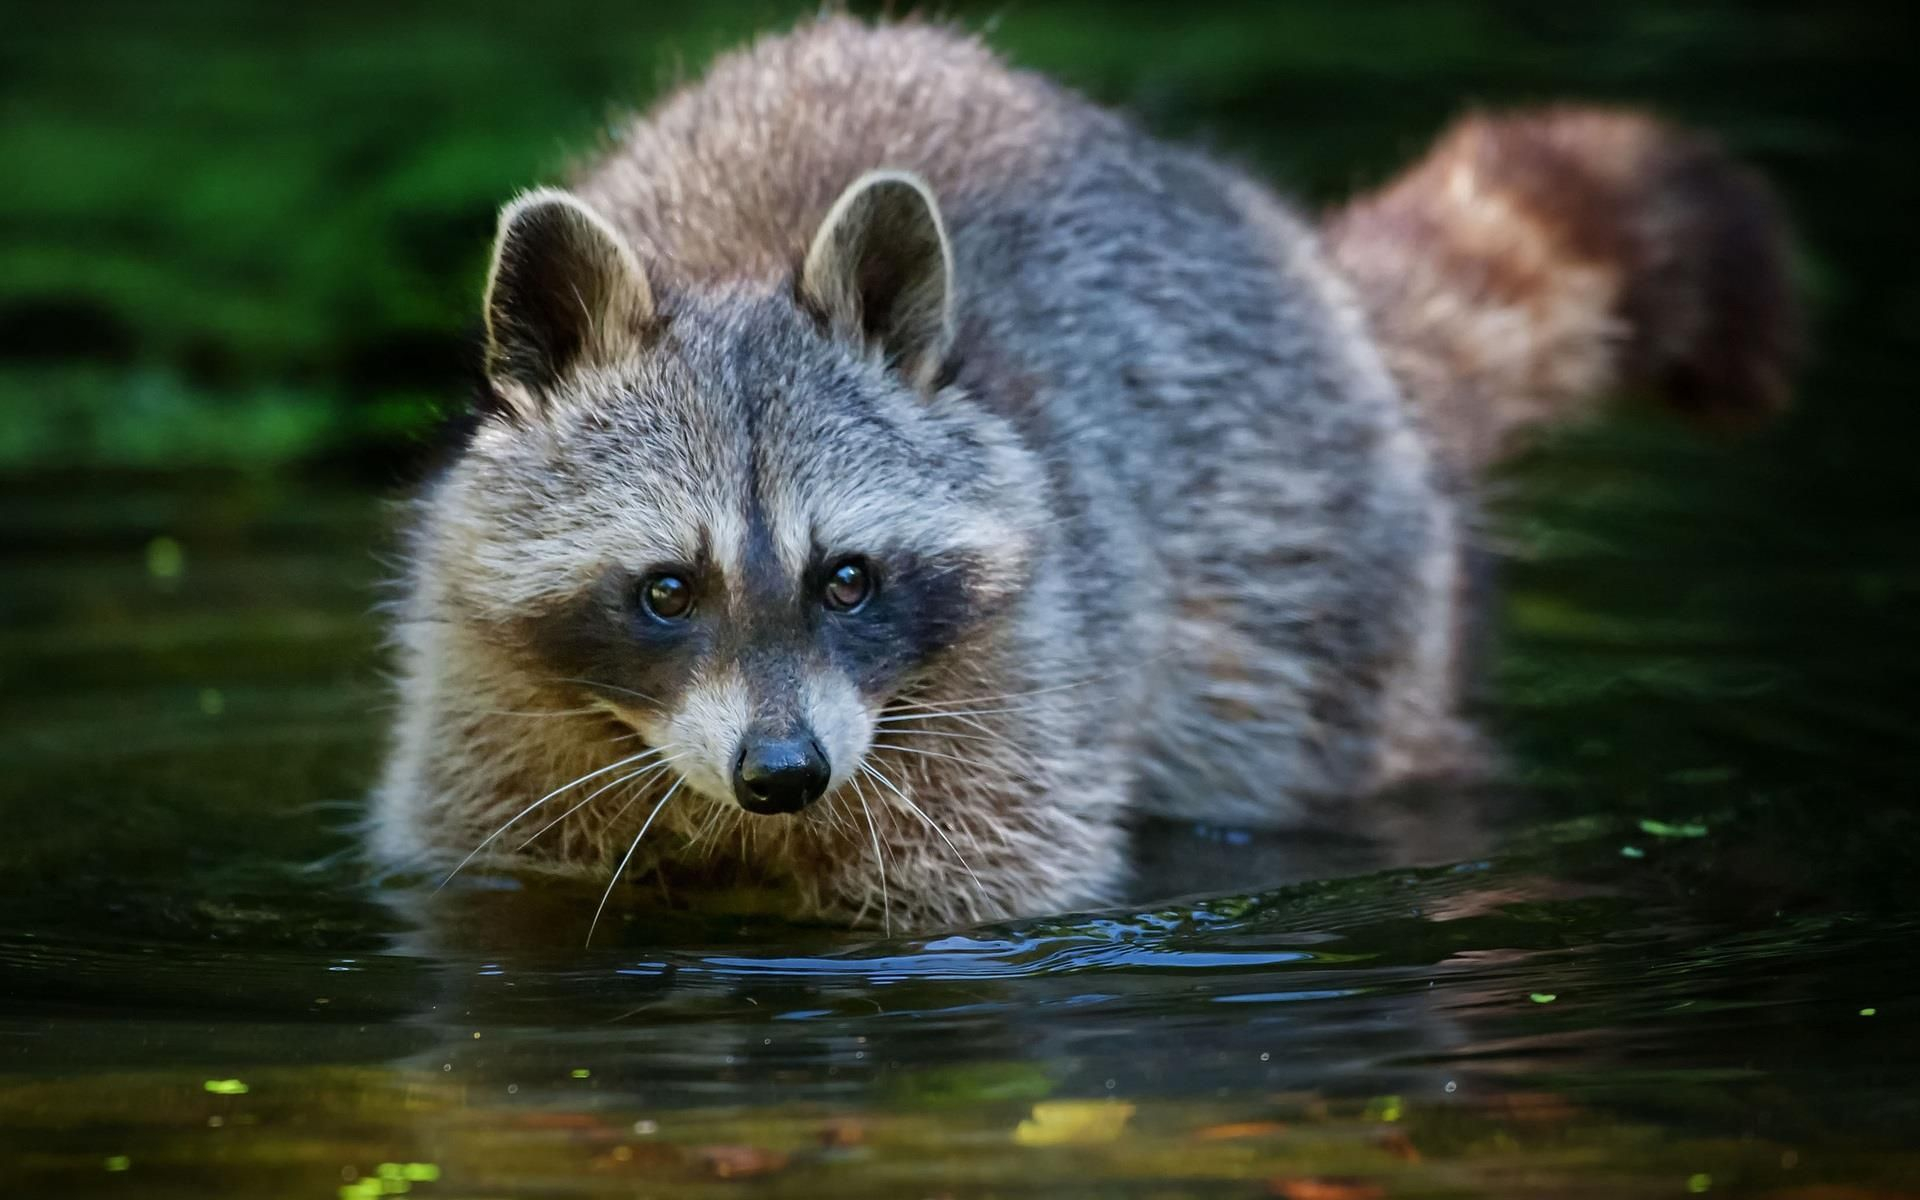 1920x1200 Get awesome Raccoons HD images in each new Chrome tab! | Animals, Raccoon, Cute racc